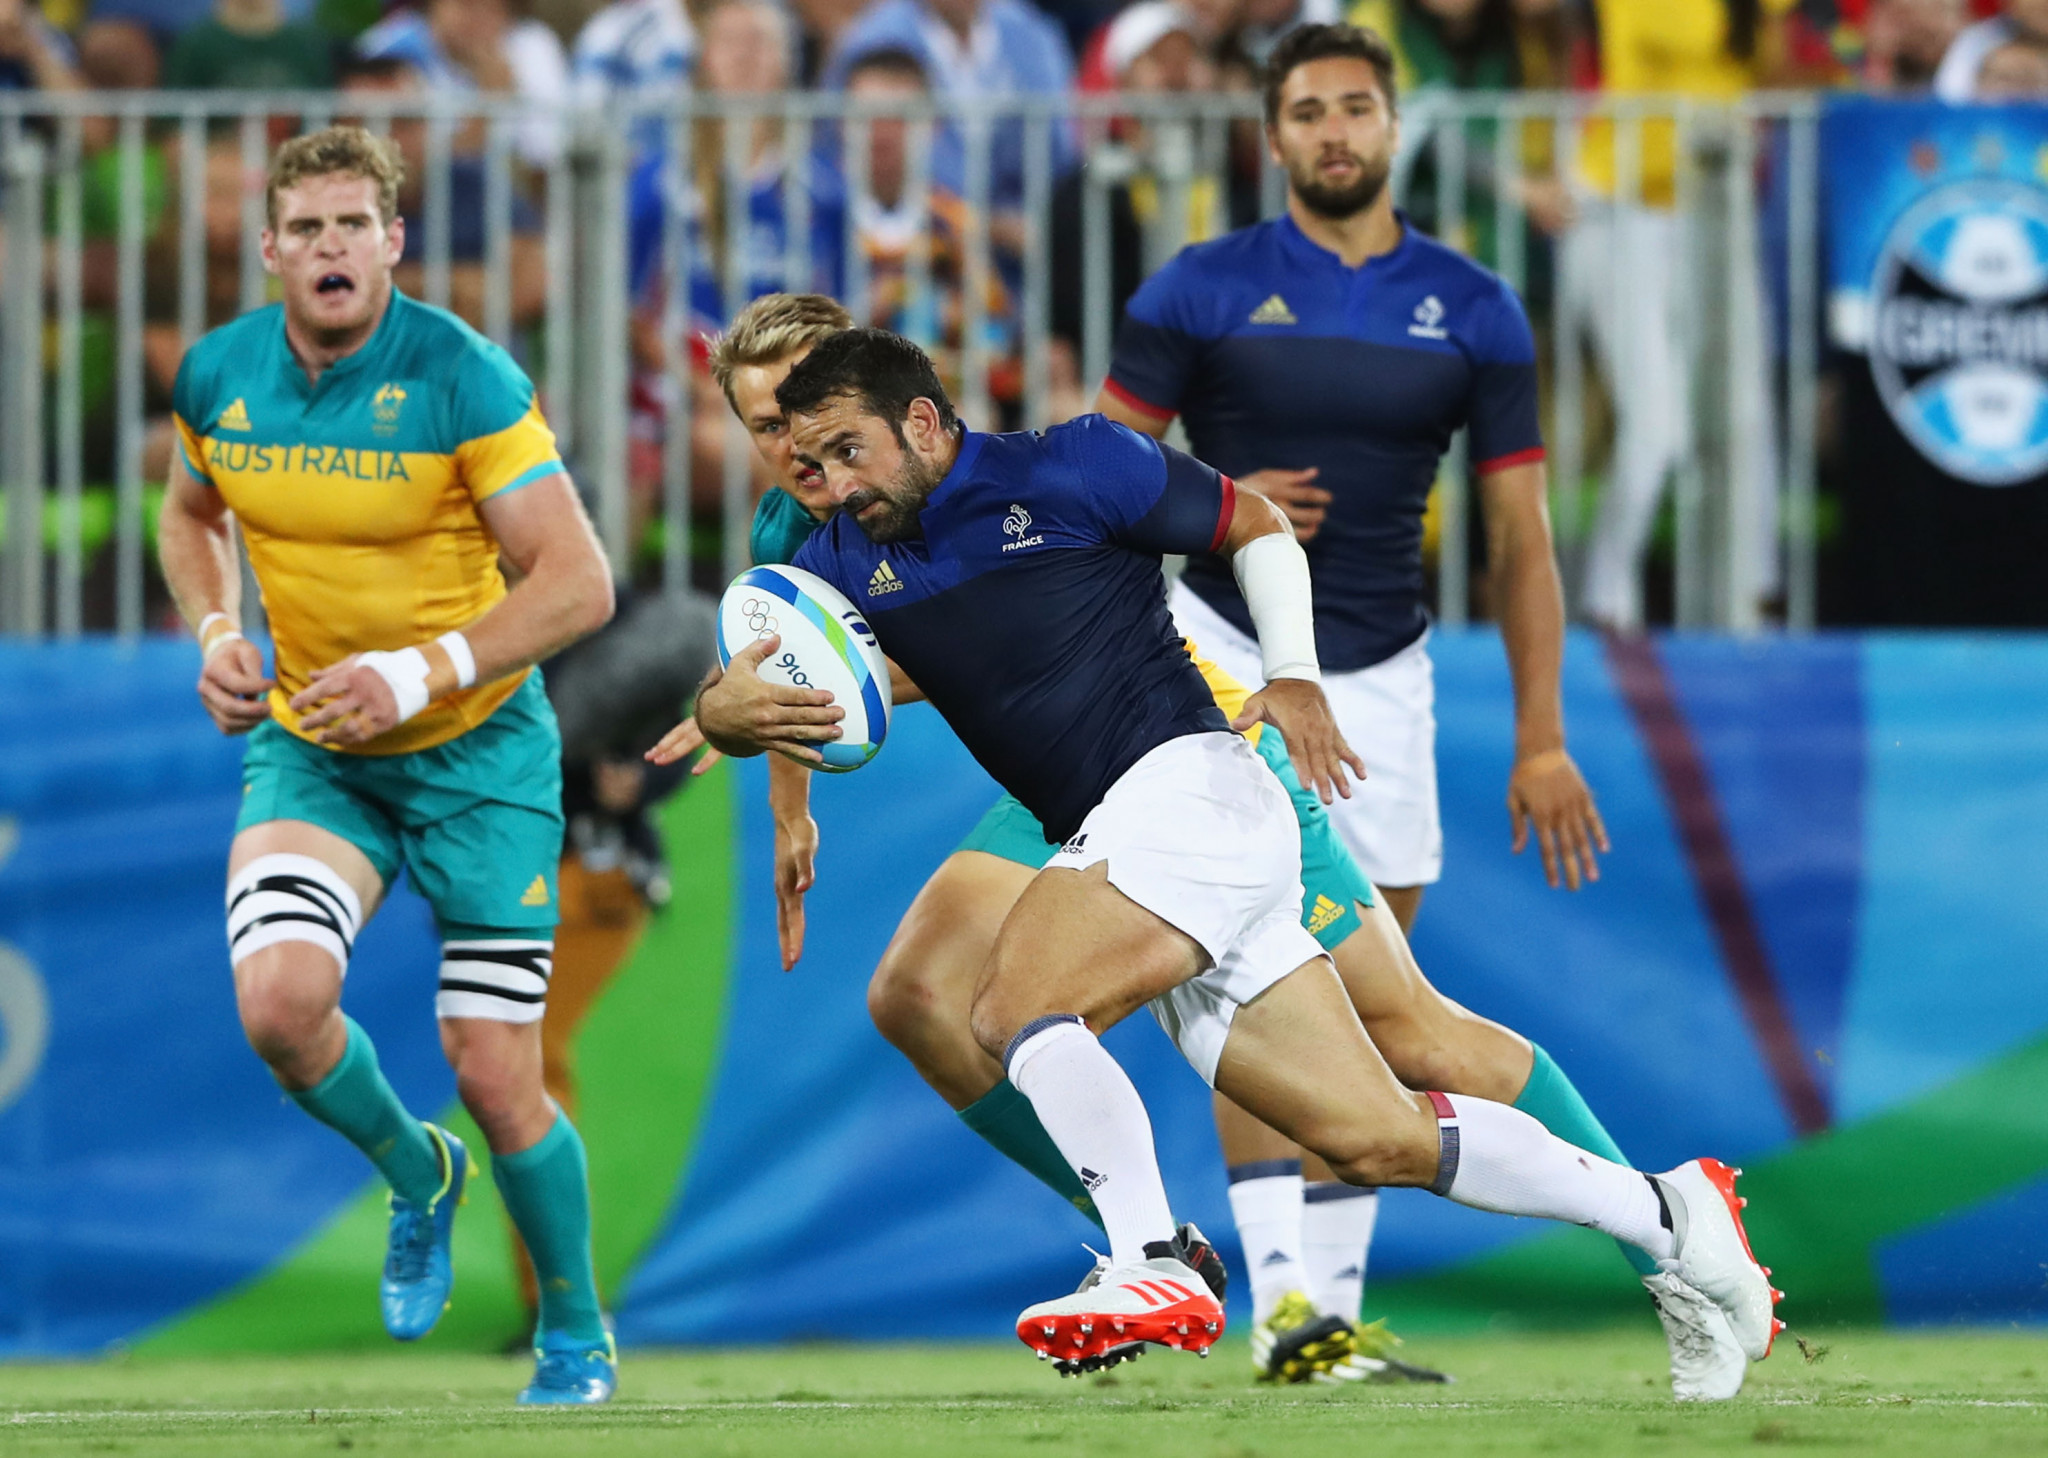 France's team finished seventh in the rugby sevens at Rio 2016, but failed to qualify for Tokyo 2020 ©Getty Images